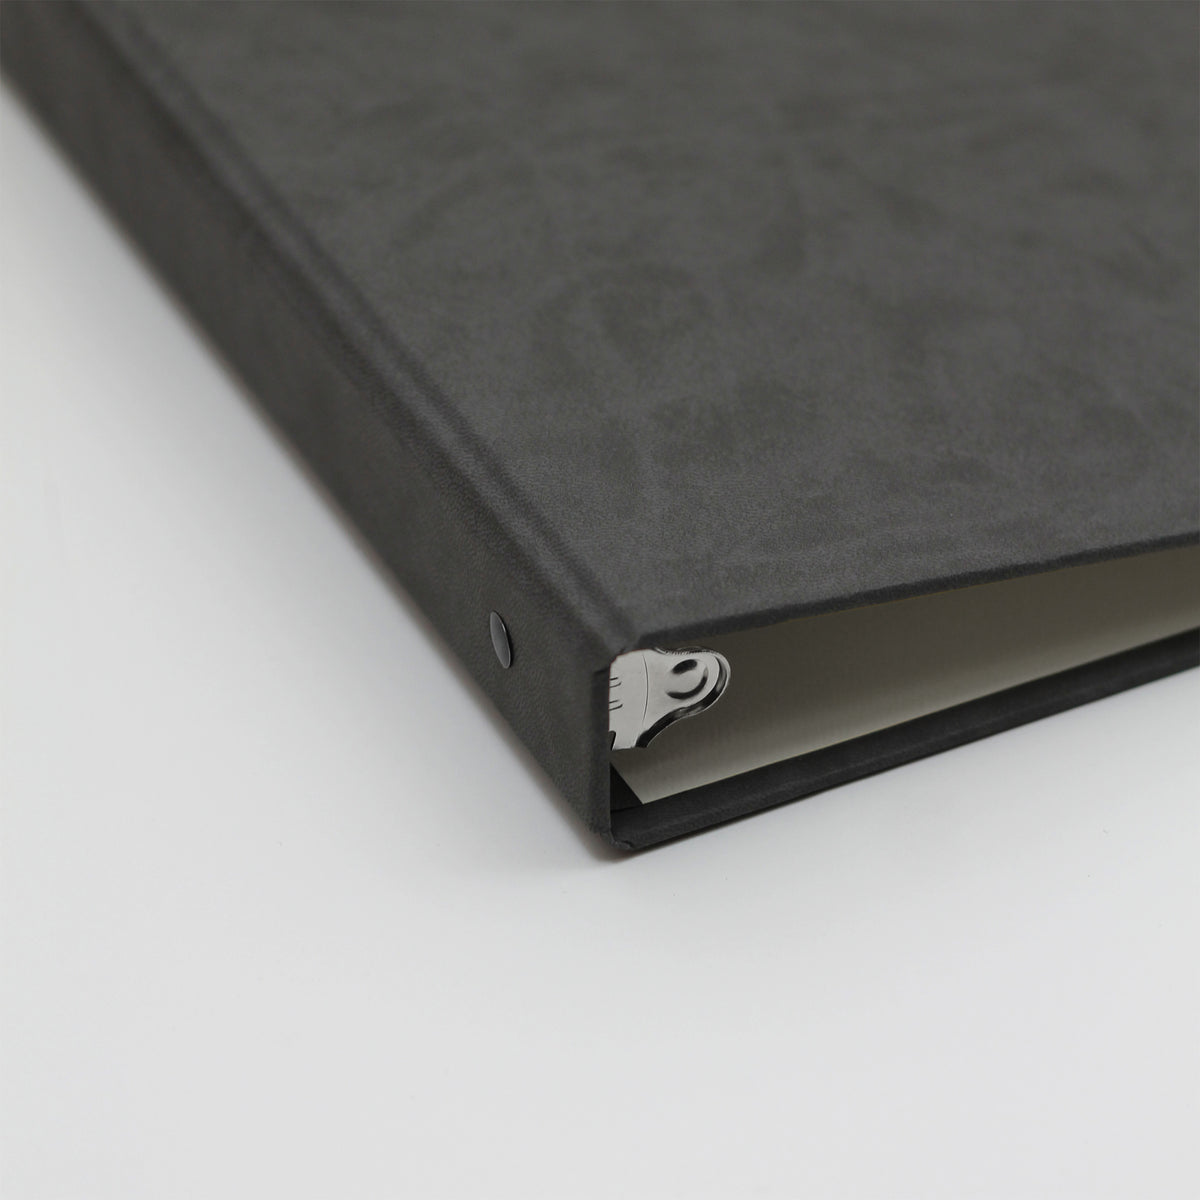 Storage Binder for Photos or Documents with Slate Vegan Leather Cover